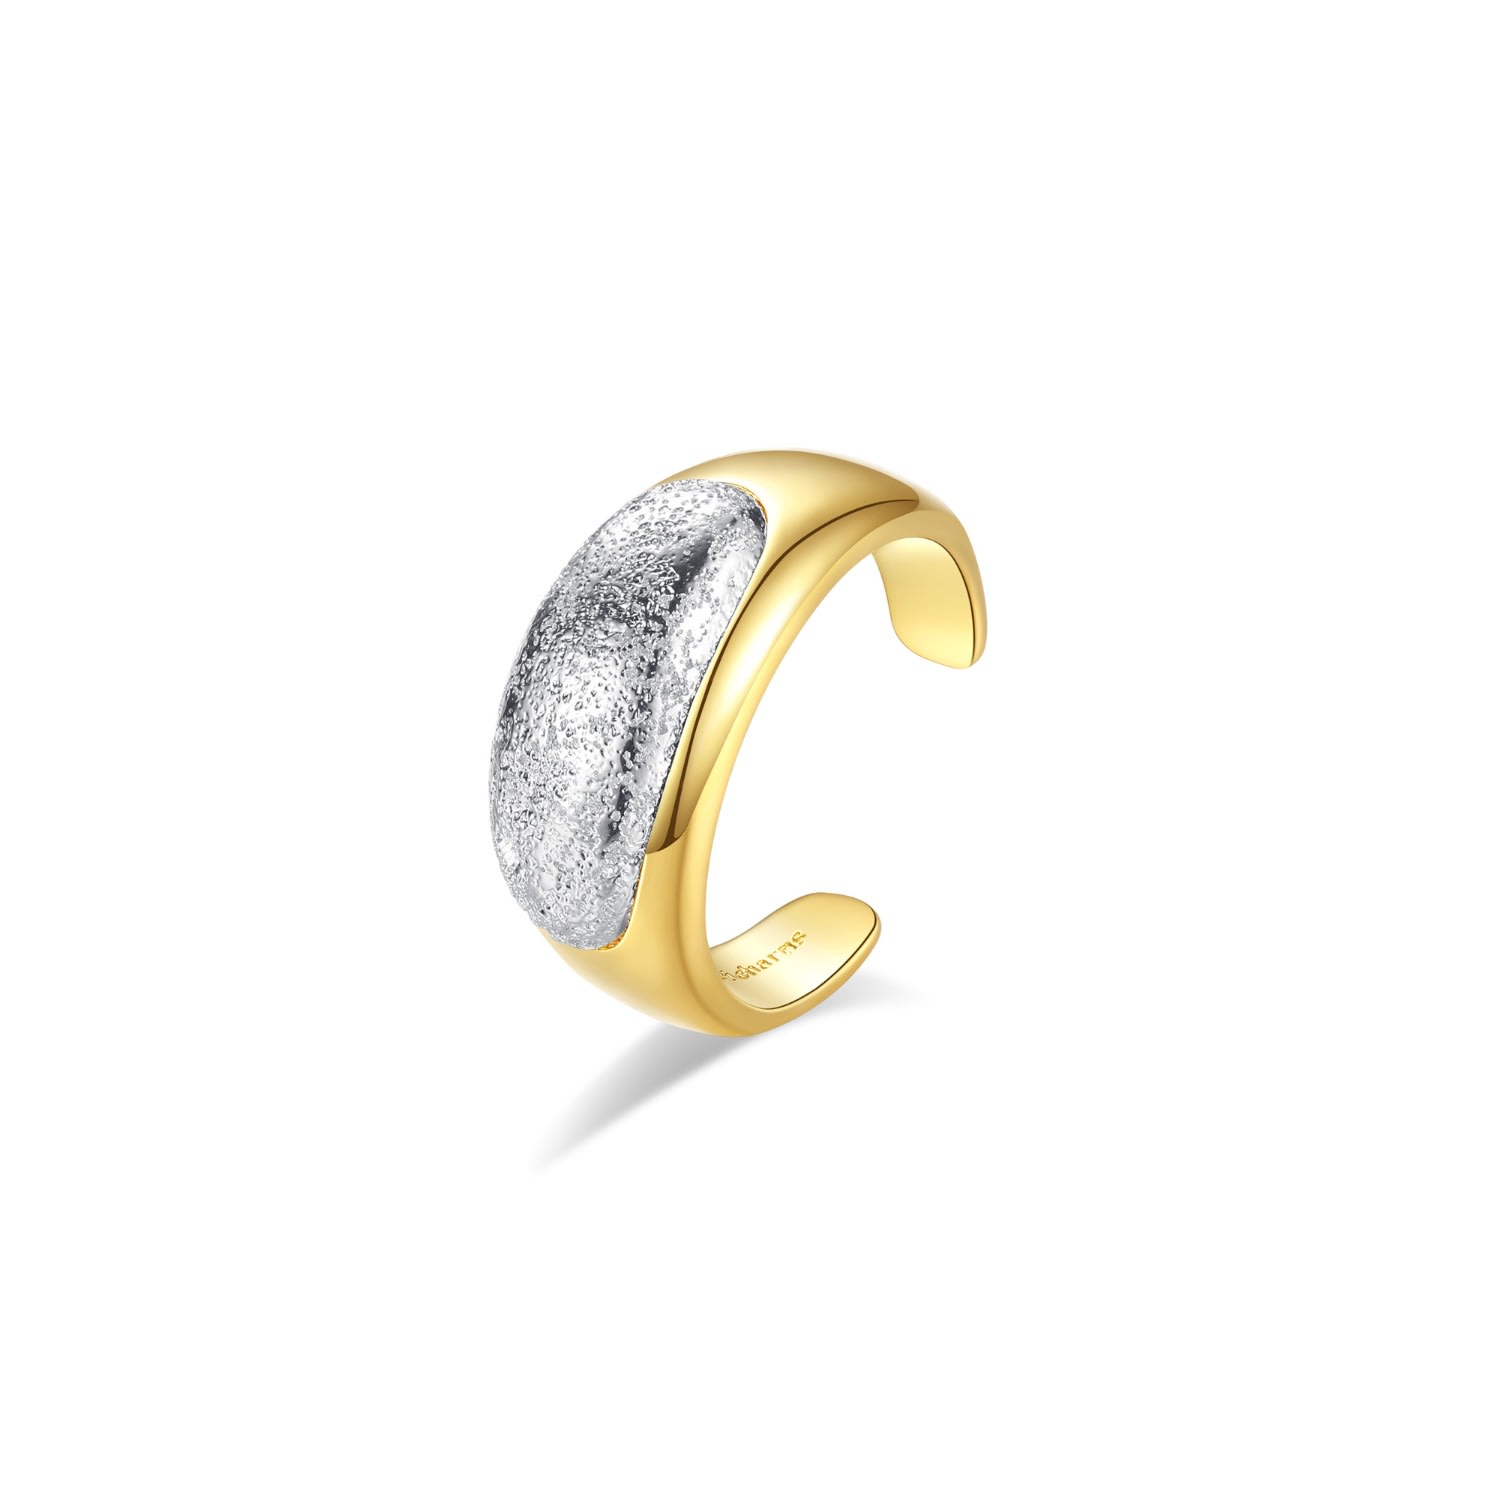 Women’s Gold / Silver Frosted & Matted Texture Two-Tone Ring Classicharms